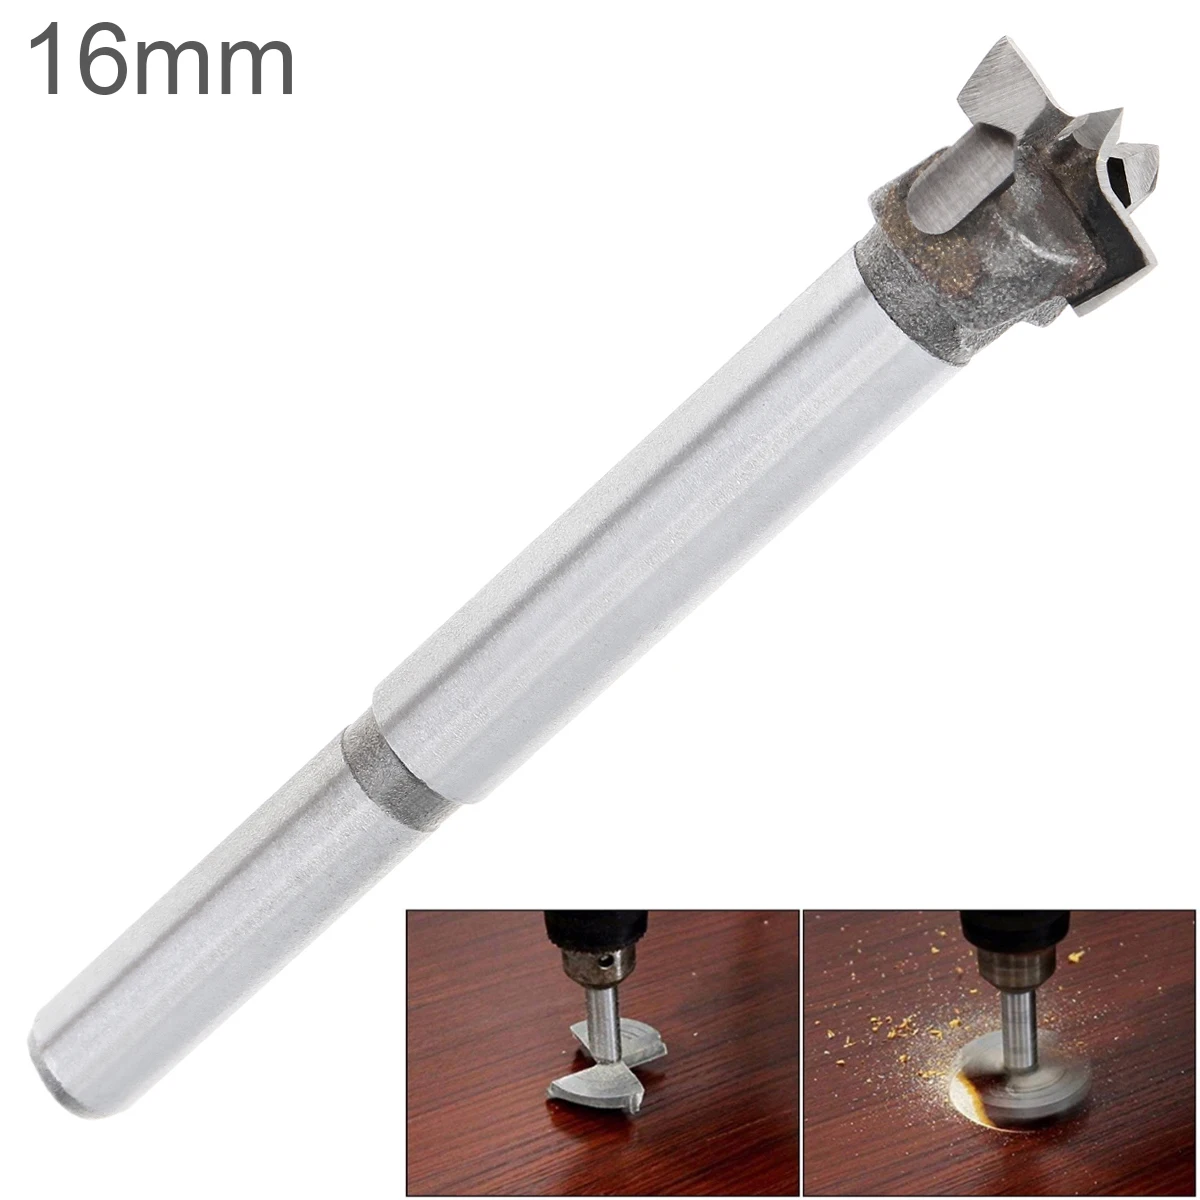 16mm Tungsten Steel Hard Alloy Wood Drill Bits Woodworking Hole Opener for Drilling on Plasterboard /Plastic Board /Wooden Board woodworking milling cutter classical ogee bit tungsten carbide blades double r line knife cabinet door wooden board tenon joint